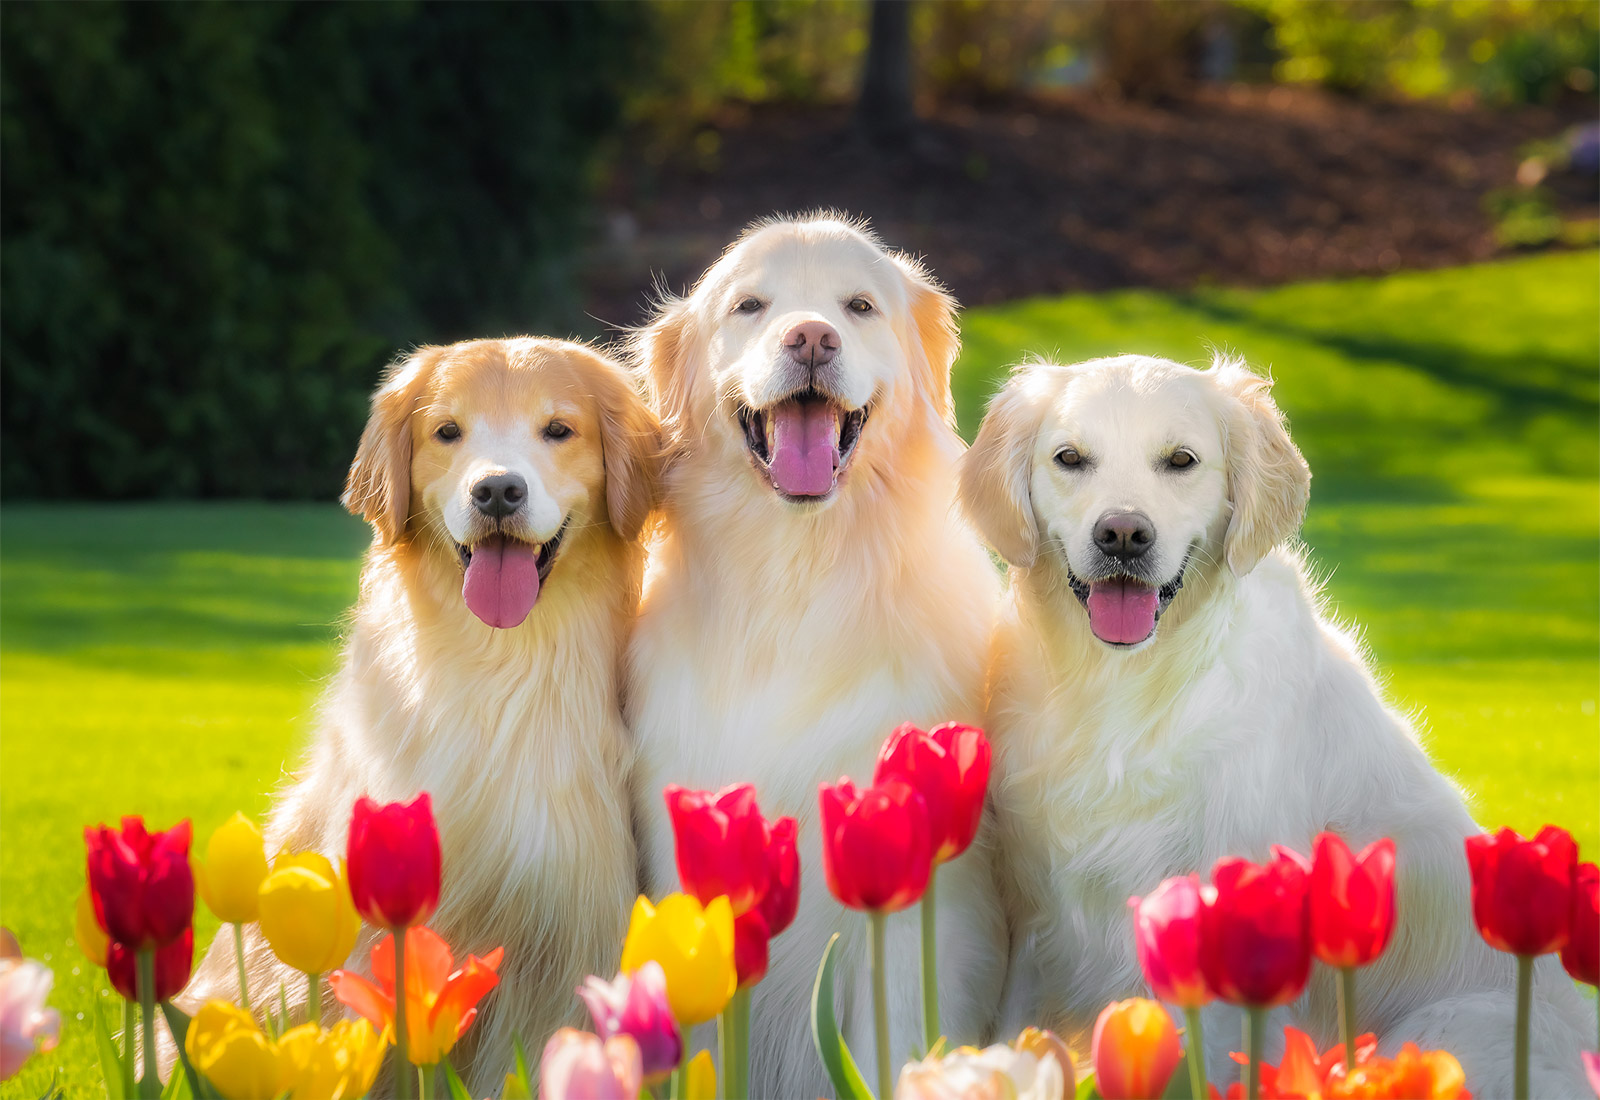 Three Golden Retrievers smiling on a summer day